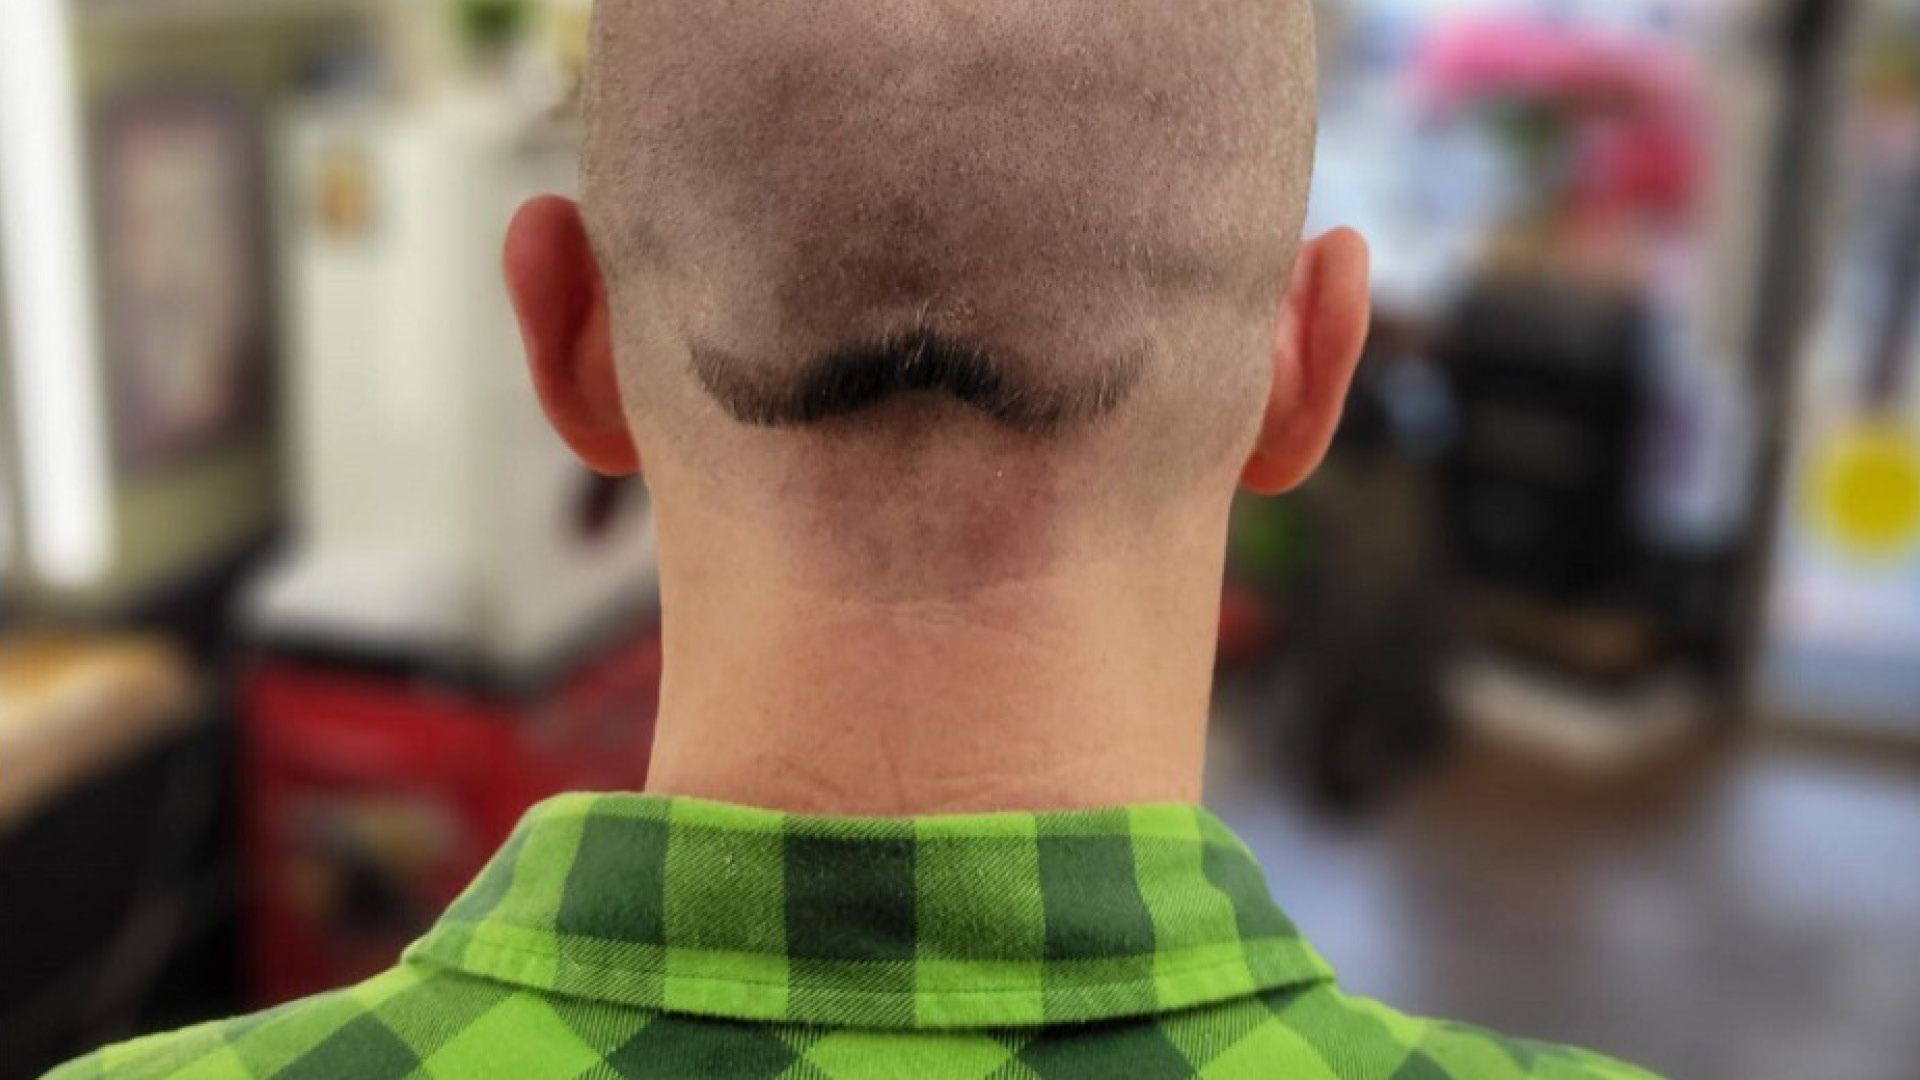 A moustache shaved into the back of a bald man's head.